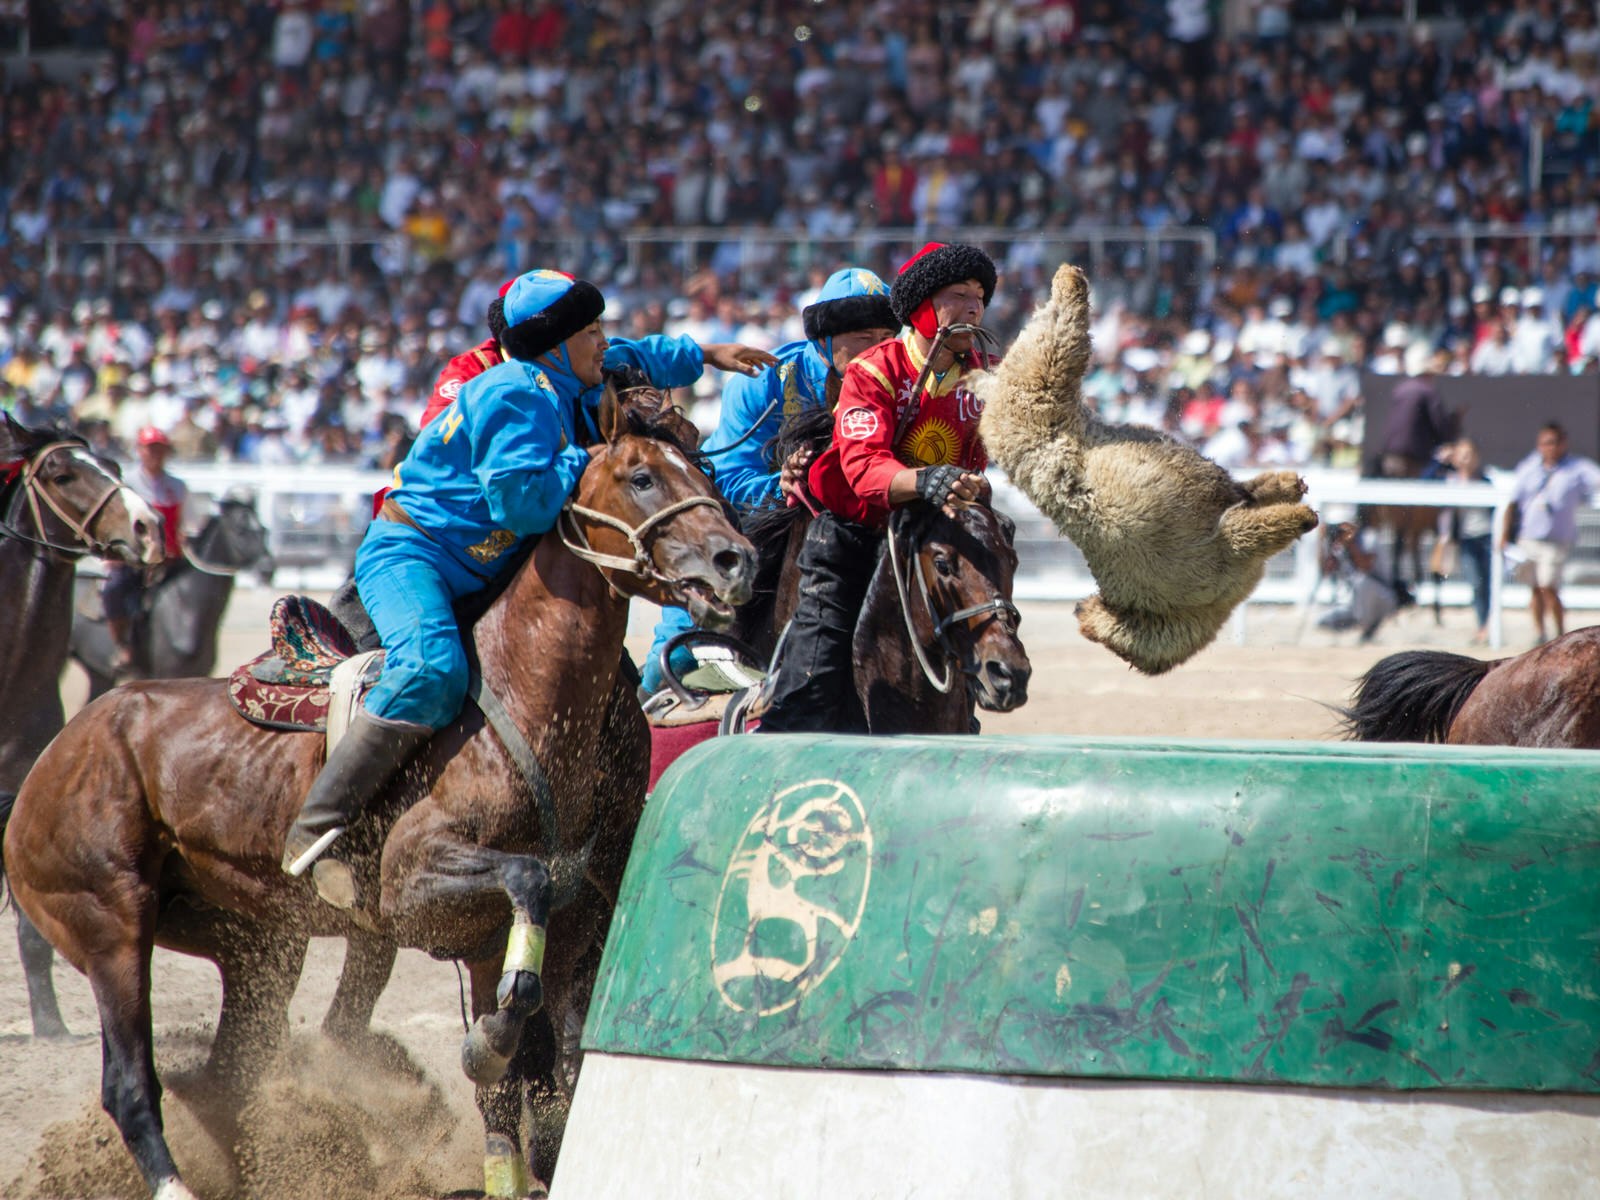 Horseback riders from two teams jostle with their horses for a goat carcass that flies through the air into the goal, in a packed stadium © Stephen Lioy / Lonely Planet